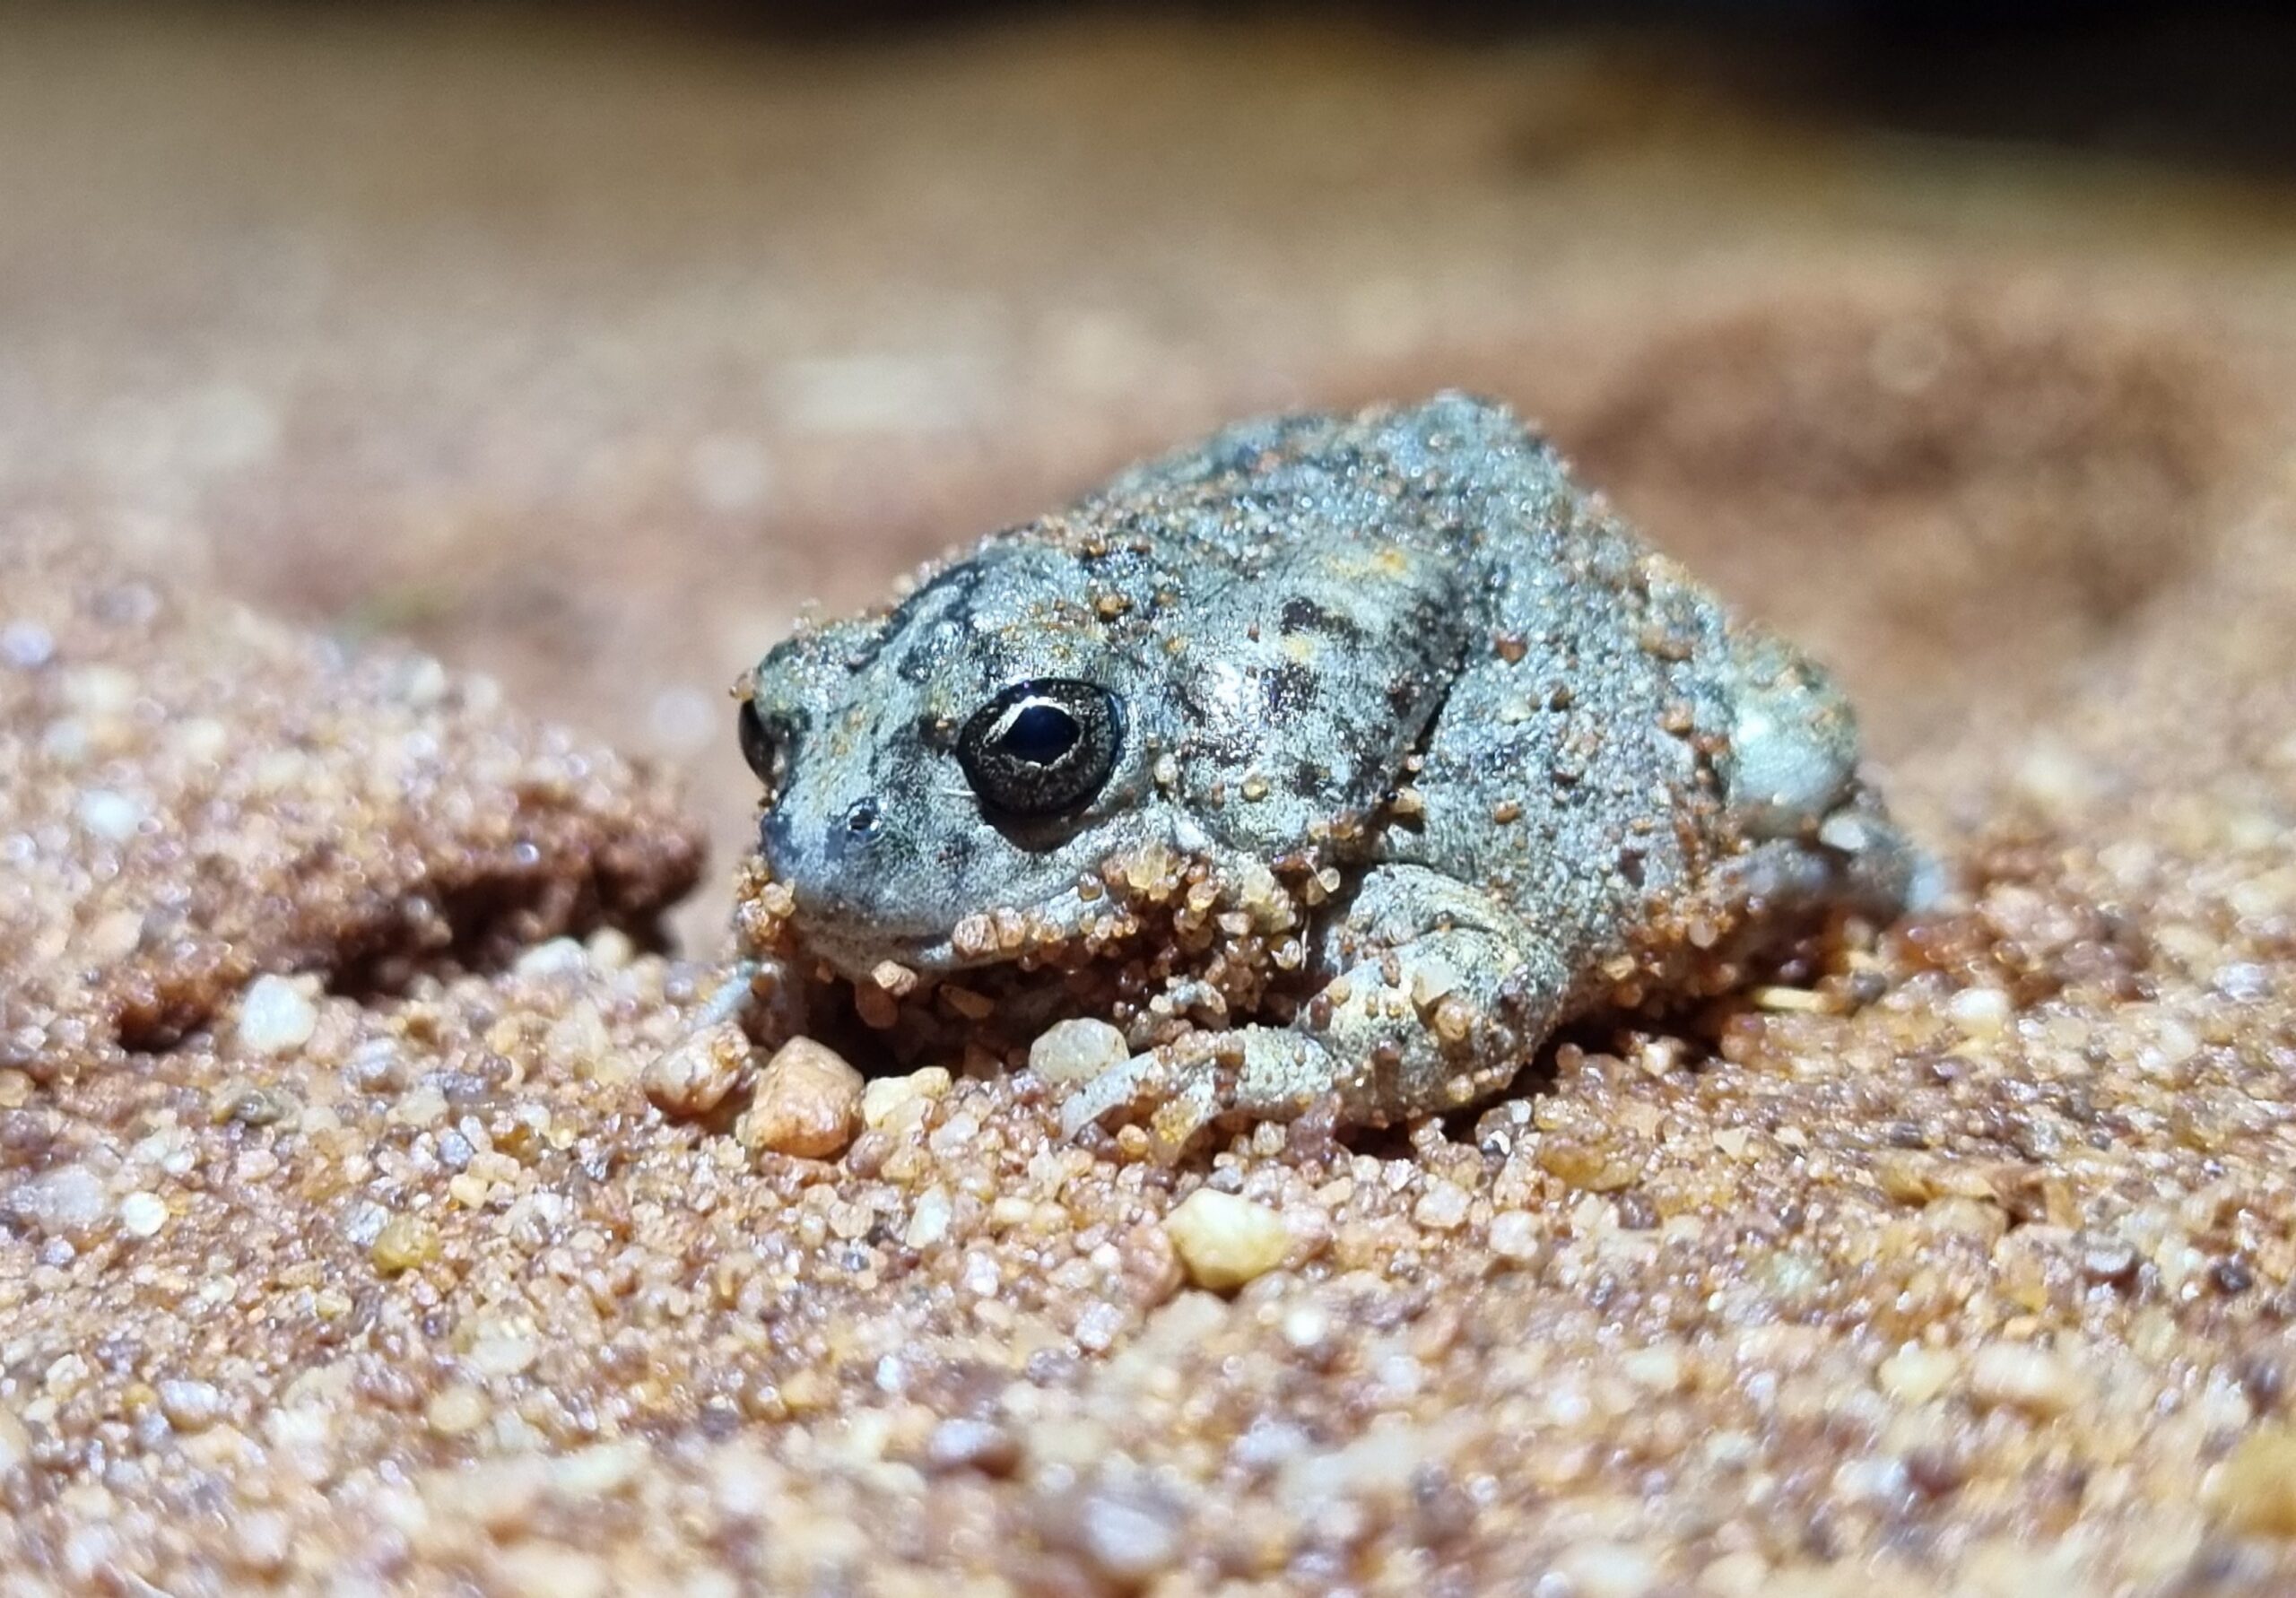 Image for article: Tiny Tanami toadlet call captured for the first time